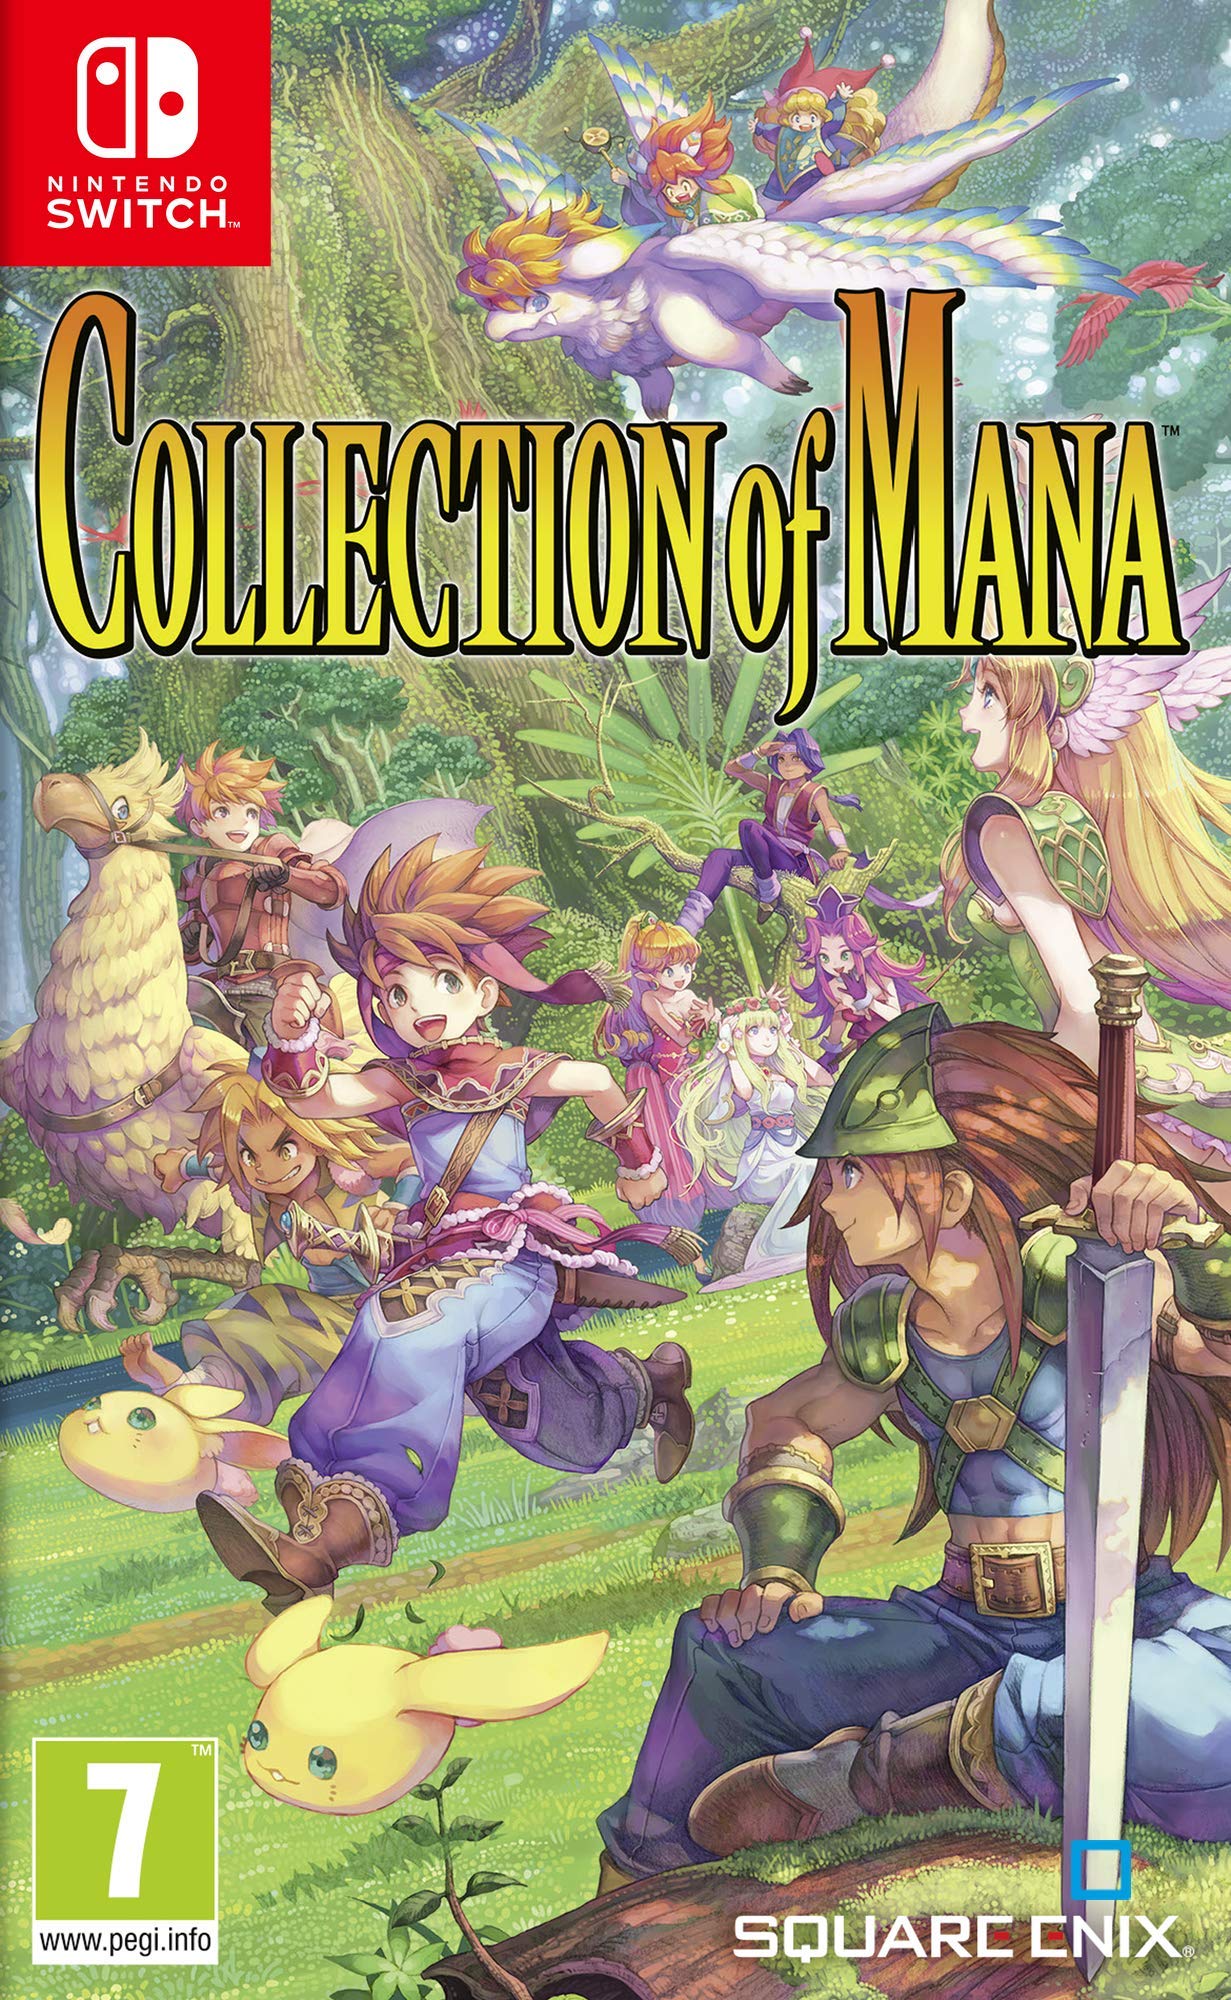 Square Enix Collection of Mana (Nintendo Switch) $24.33